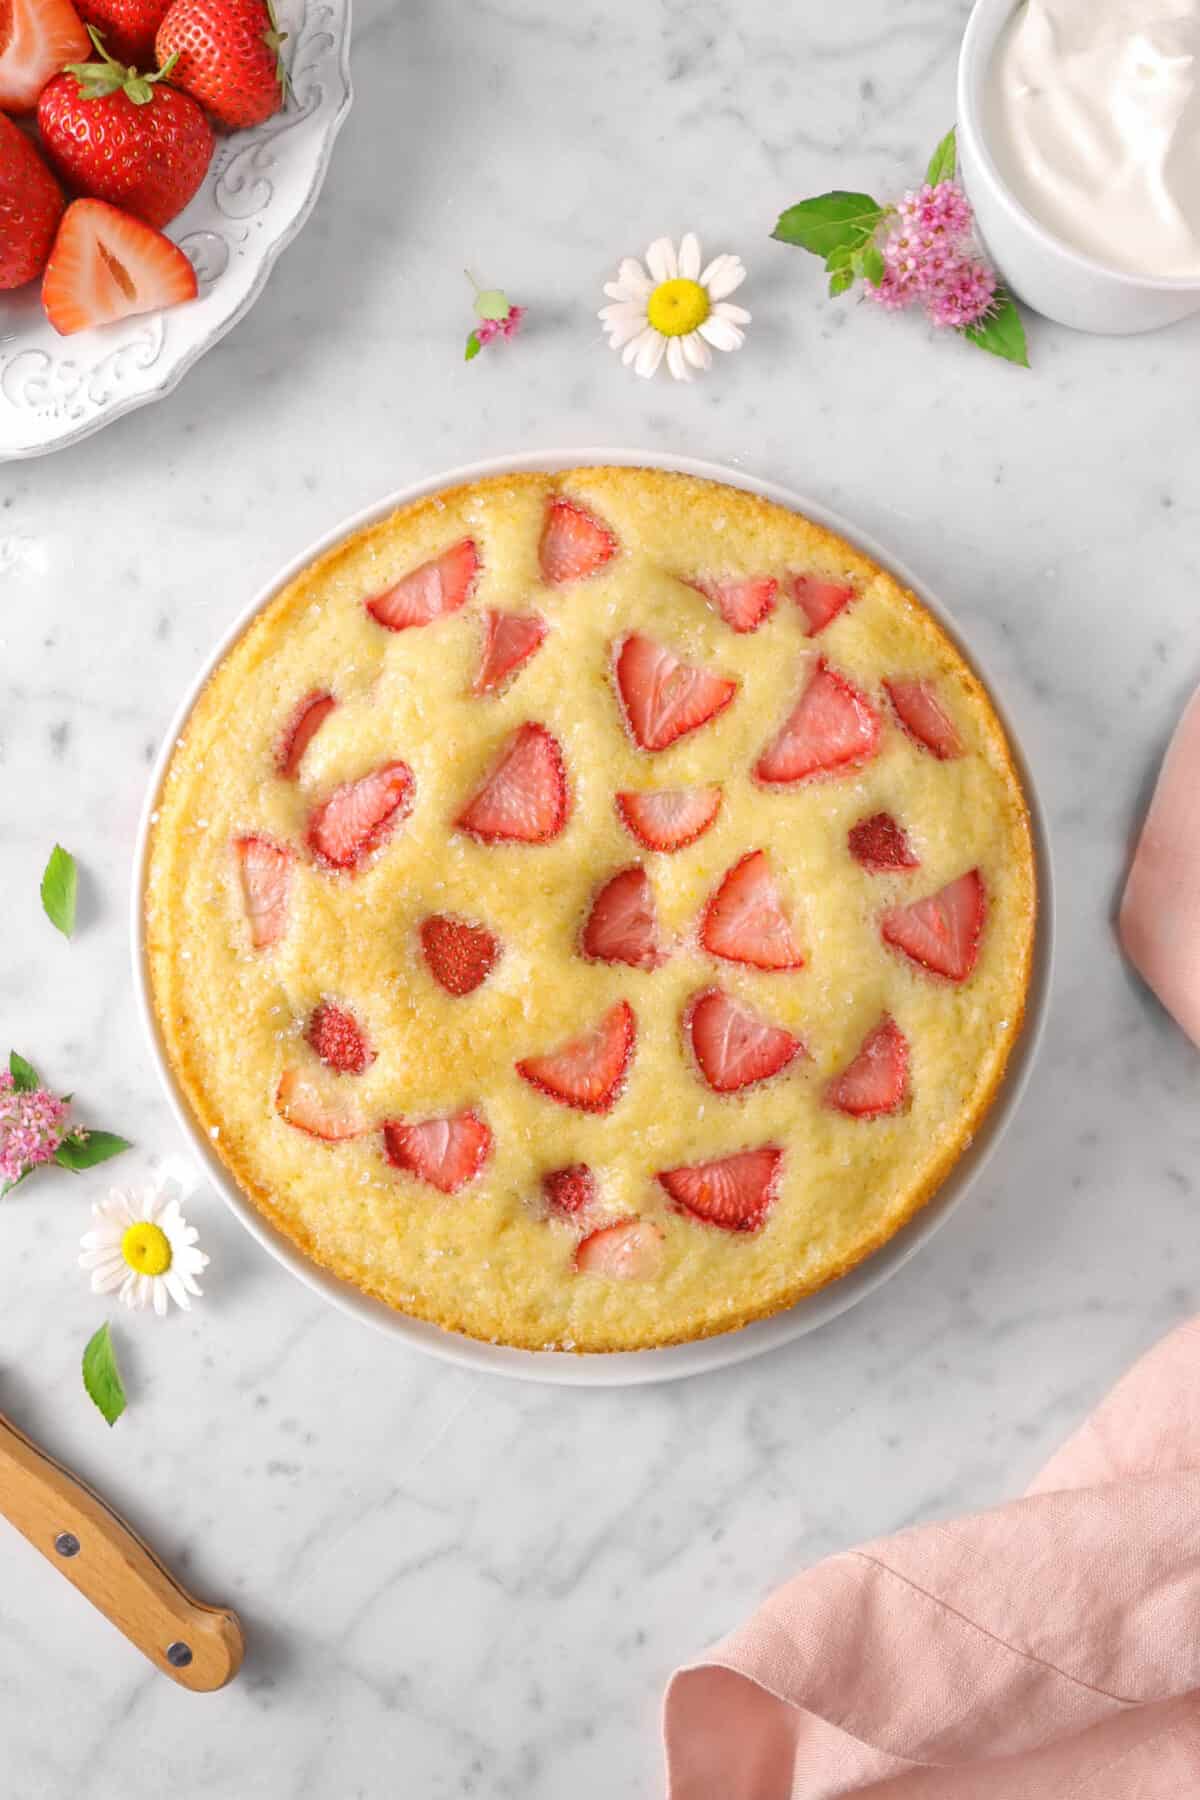 strawberry snack cake on a white plate with flowers, a pink napkin, a knife hilt, strawberries, and whipped cream